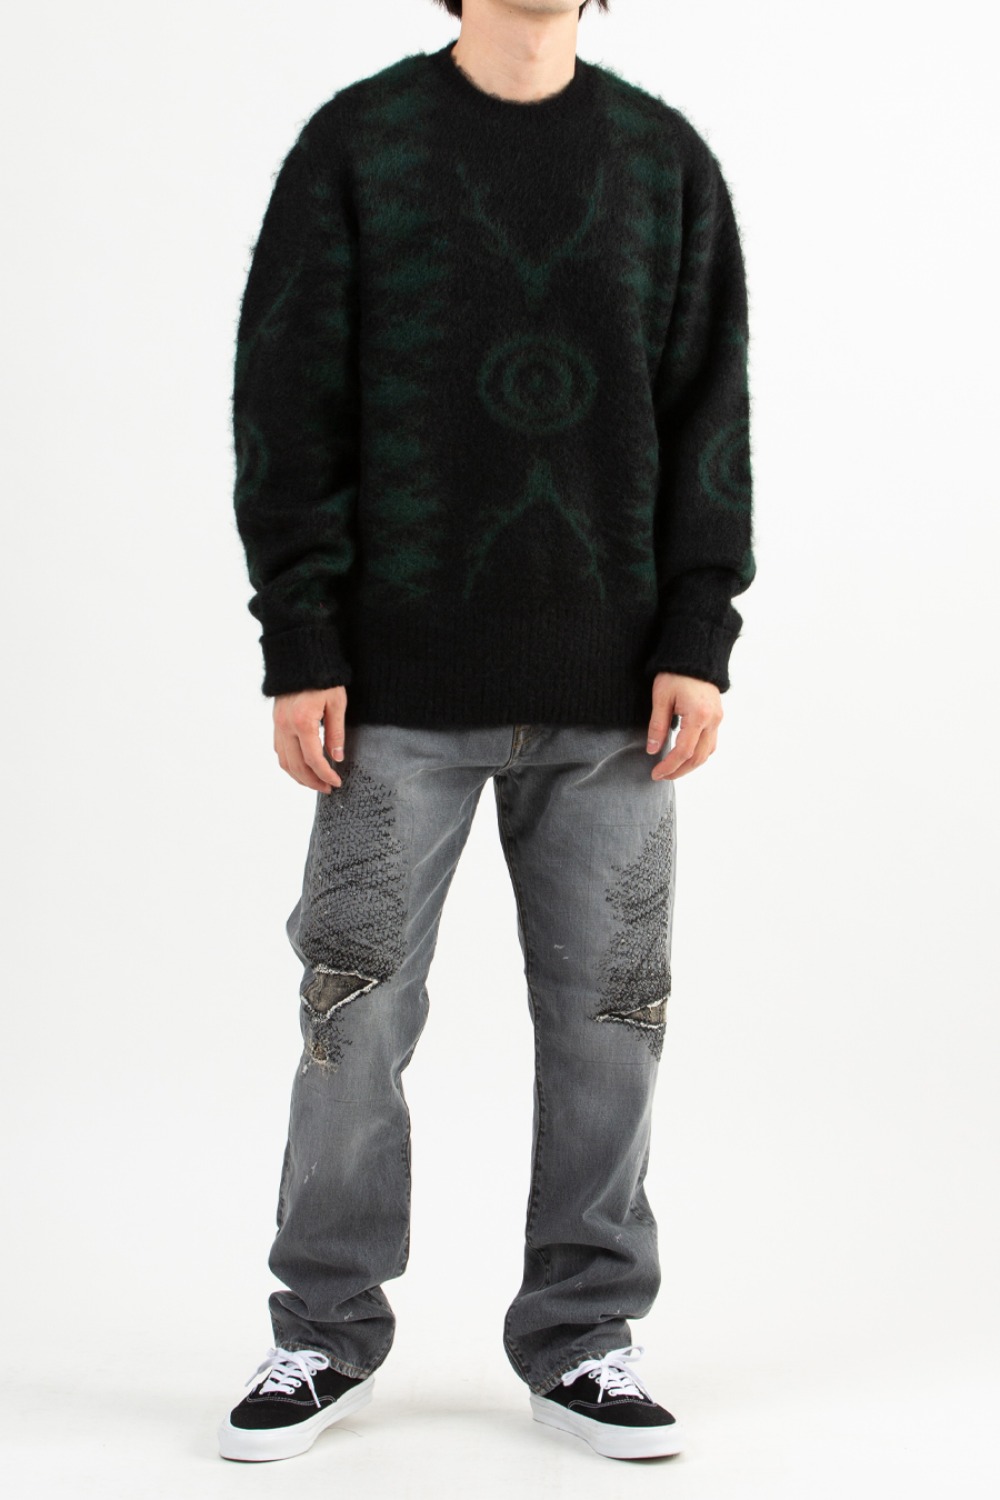 LOOSE FIT SWEATER - S2W8 NATIVE BLACK